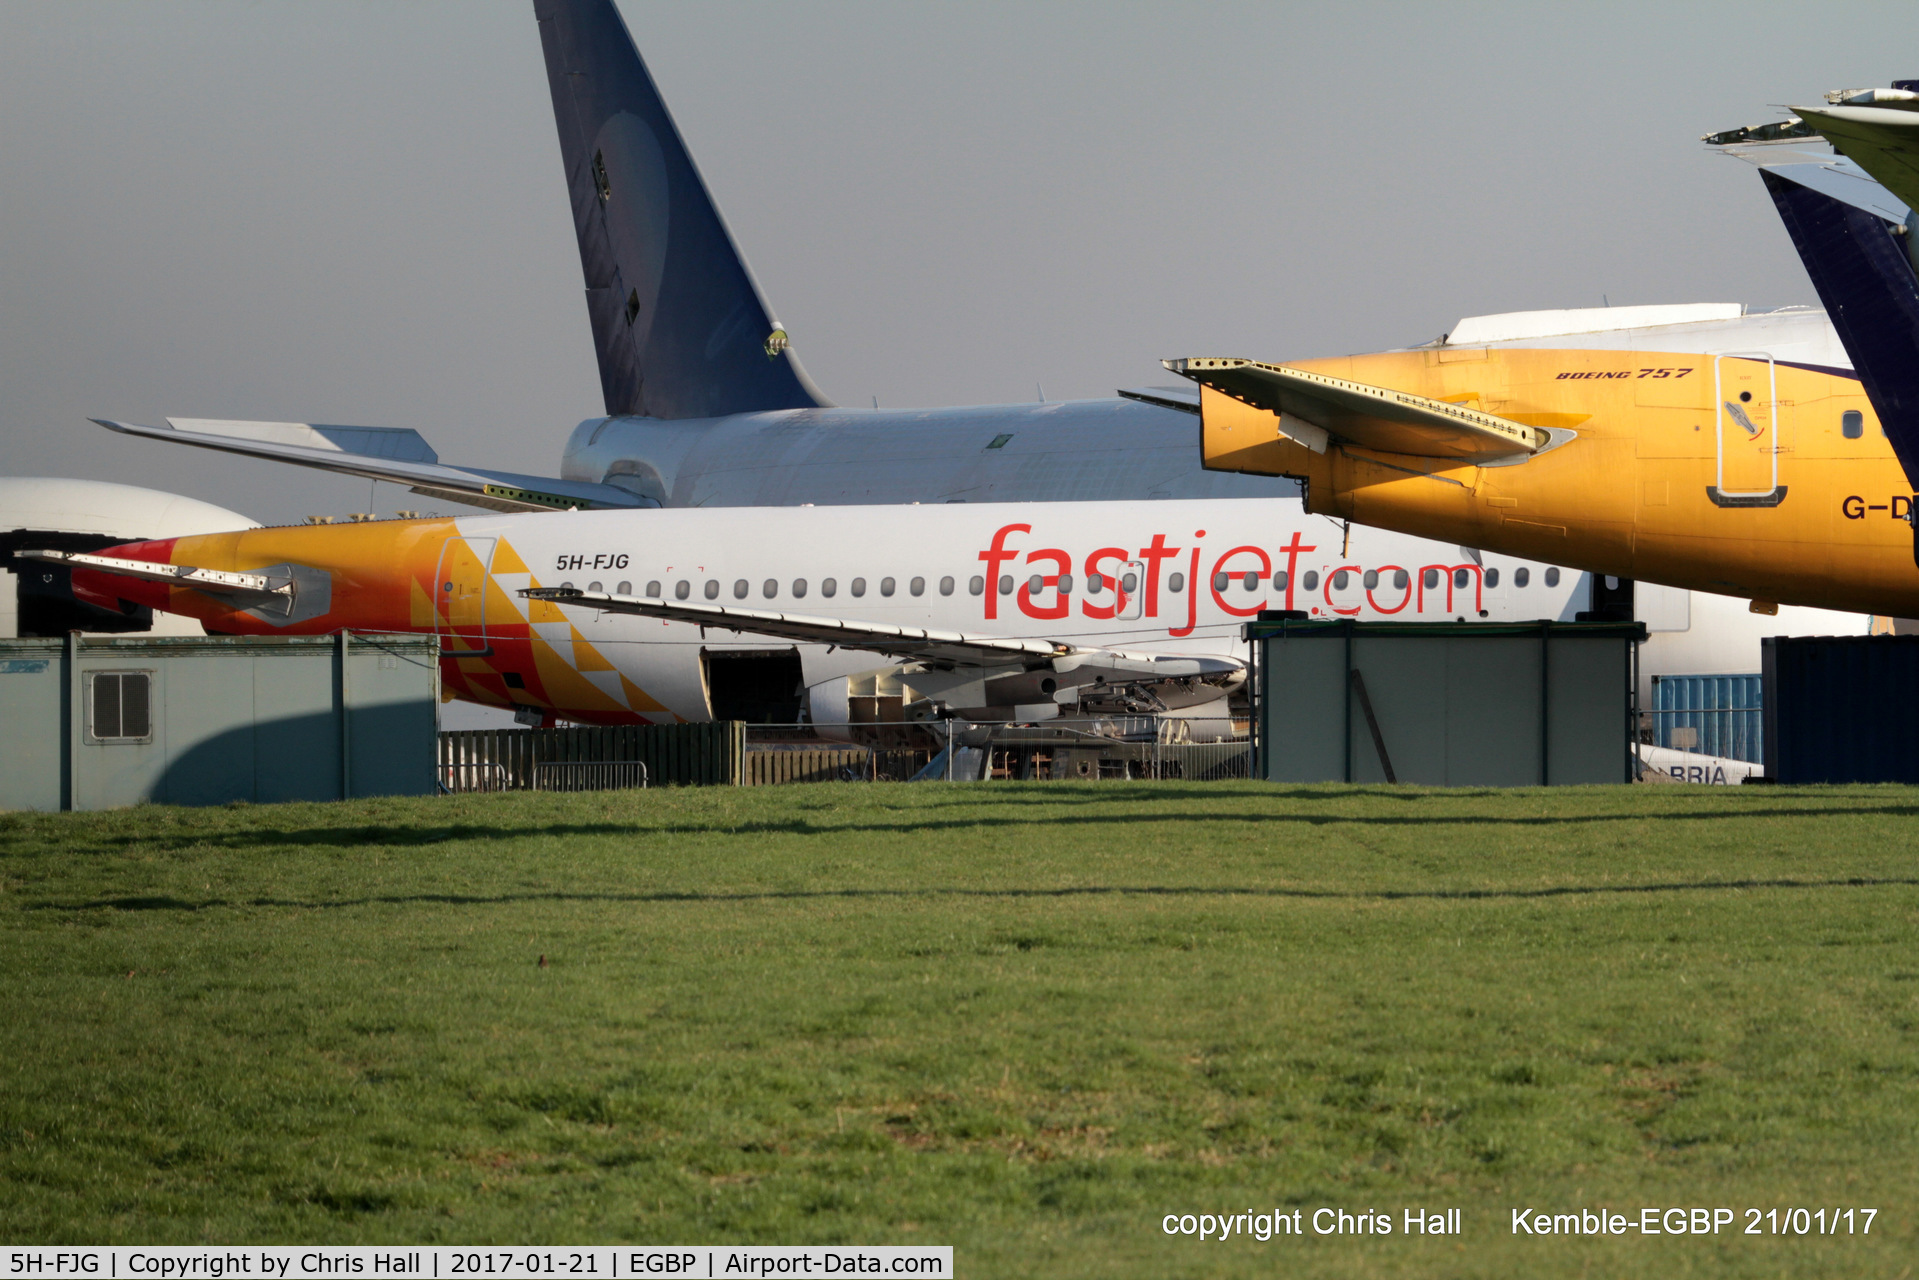 5H-FJG, 2006 Airbus A319-112 C/N 2891, in the scrapping area at Kemble